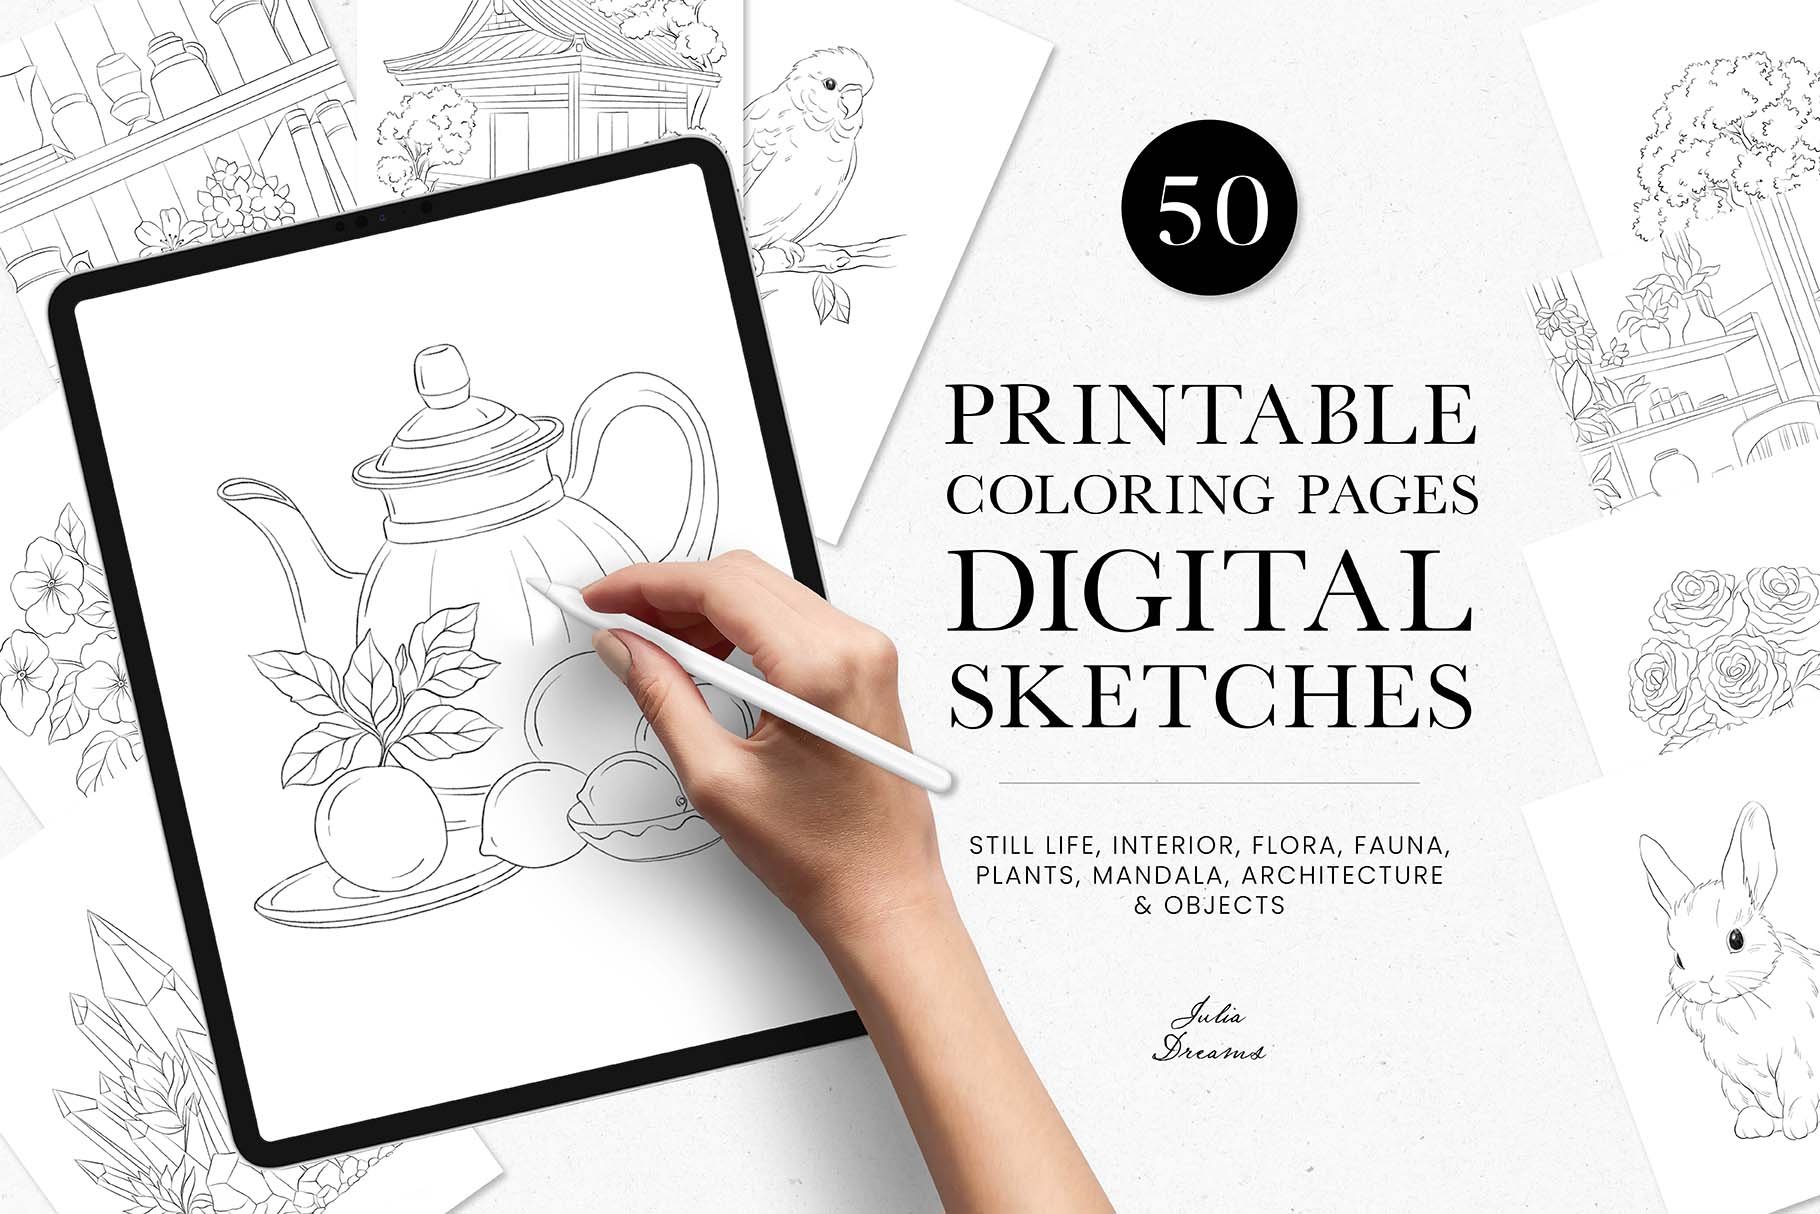 Digital Sketches - Printable Coloring Pages